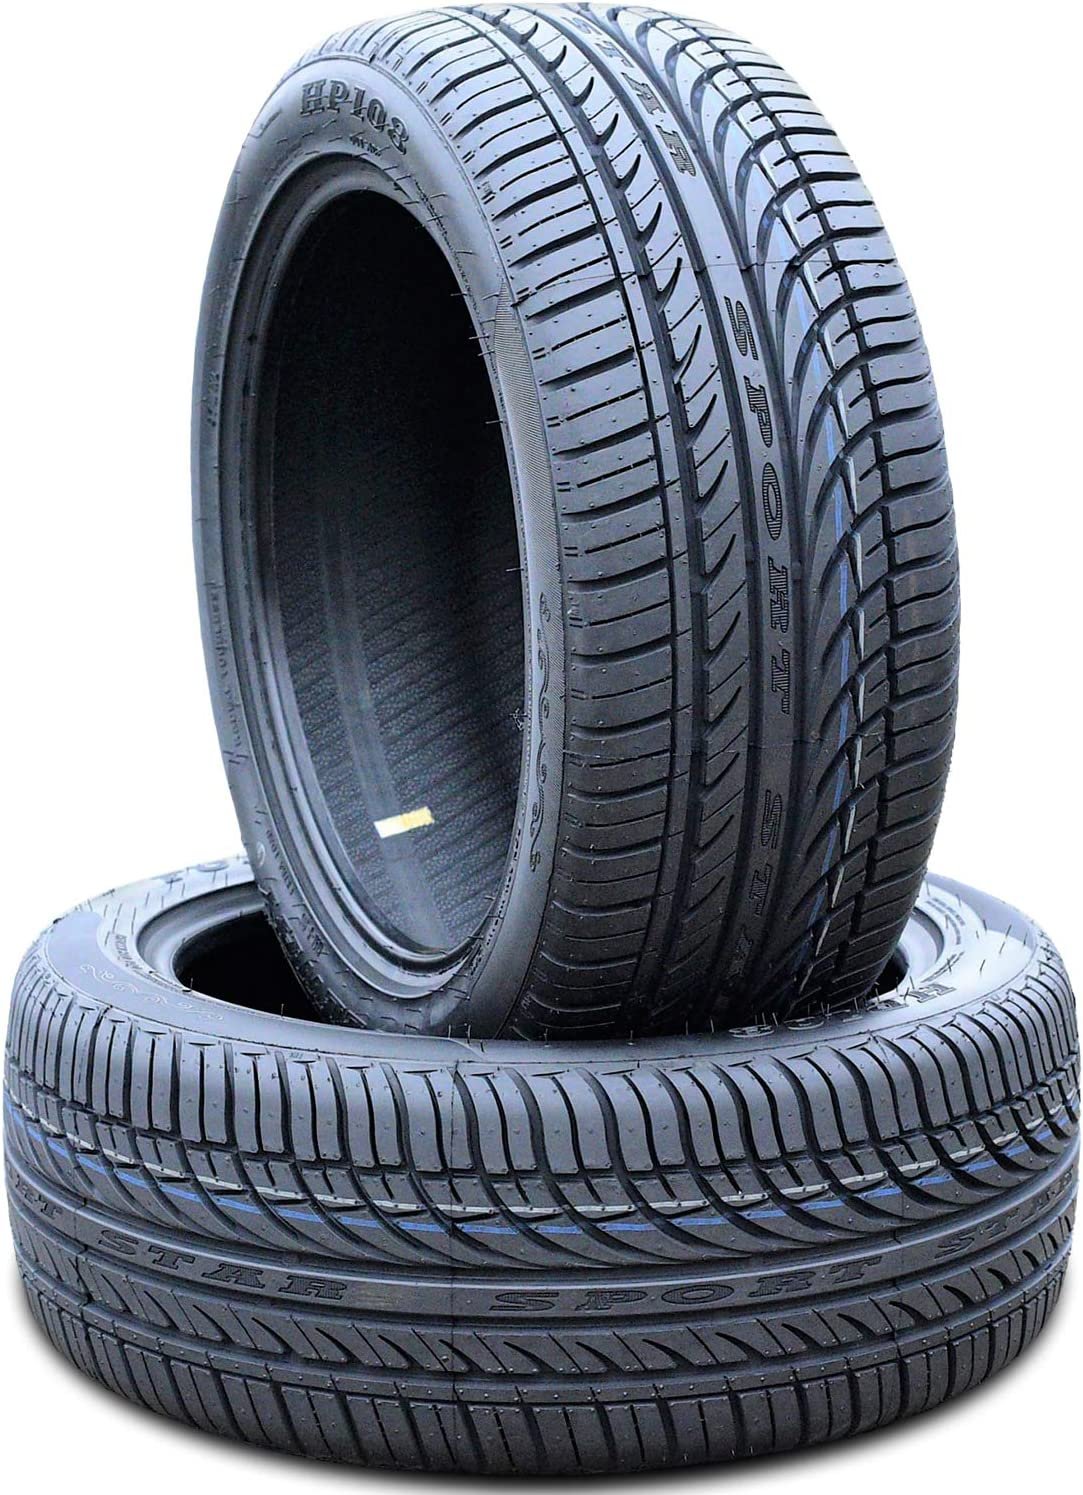 Set of 2 (TWO) Fullway HP108 All-Season High Performance Radial Tires-215/55R17 215/55ZR17